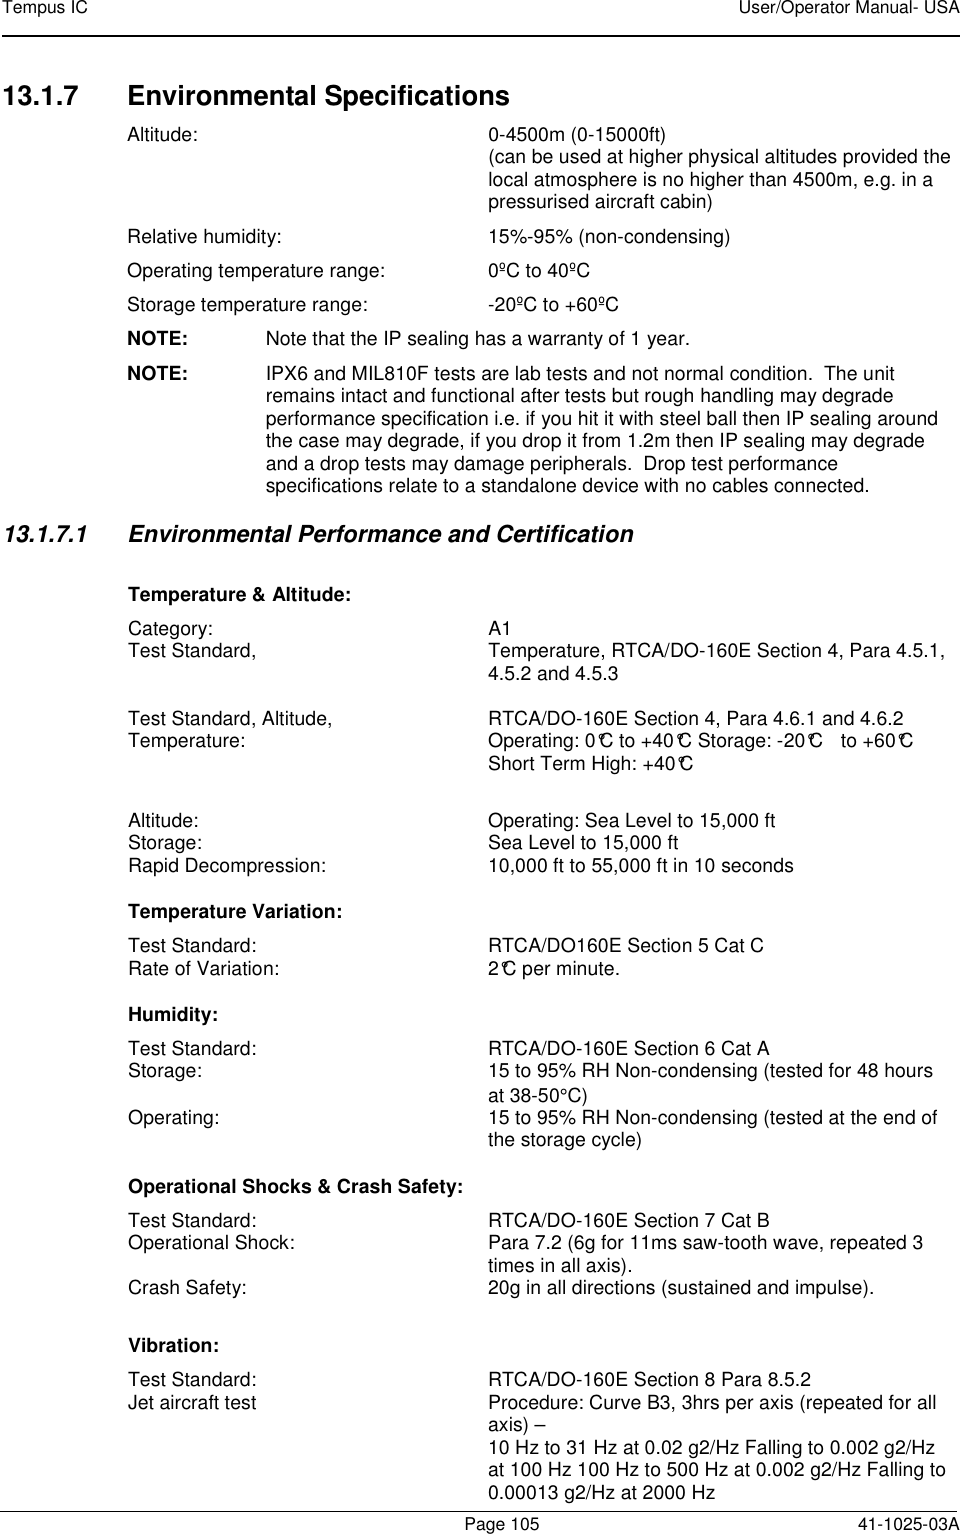 Tempus IC    User/Operator Manual- USA        Page 105   41-1025-03A 13.1.7  Environmental Specifications Altitude:  0-4500m (0-15000ft) (can be used at higher physical altitudes provided the local atmosphere is no higher than 4500m, e.g. in a pressurised aircraft cabin) Relative humidity:  15%-95% (non-condensing) Operating temperature range:  0ºC to 40ºC Storage temperature range:  -20ºC to +60ºC NOTE:  Note that the IP sealing has a warranty of 1 year. NOTE:  IPX6 and MIL810F tests are lab tests and not normal condition.  The unit remains intact and functional after tests but rough handling may degrade performance specification i.e. if you hit it with steel ball then IP sealing around the case may degrade, if you drop it from 1.2m then IP sealing may degrade and a drop tests may damage peripherals.  Drop test performance specifications relate to a standalone device with no cables connected. 13.1.7.1  Environmental Performance and Certification Temperature &amp; Altitude: Category:  A1 Test Standard,  Temperature, RTCA/DO-160E Section 4, Para 4.5.1, 4.5.2 and 4.5.3  Test Standard, Altitude,  RTCA/DO-160E Section 4, Para 4.6.1 and 4.6.2 Temperature:  Operating: 0°C to +40°C Storage: -20°C  to +60°C   Short Term High: +40°C  Altitude:  Operating: Sea Level to 15,000 ft Storage:   Sea Level to 15,000 ft Rapid Decompression:  10,000 ft to 55,000 ft in 10 seconds   Temperature Variation: Test Standard:  RTCA/DO160E Section 5 Cat C Rate of Variation:  2°C per minute. Humidity: Test Standard:  RTCA/DO-160E Section 6 Cat A Storage:   15 to 95% RH Non-condensing (tested for 48 hours at 38-50°C) Operating:   15 to 95% RH Non-condensing (tested at the end of the storage cycle)  Operational Shocks &amp; Crash Safety: Test Standard:  RTCA/DO-160E Section 7 Cat B Operational Shock:  Para 7.2 (6g for 11ms saw-tooth wave, repeated 3 times in all axis). Crash Safety:  20g in all directions (sustained and impulse). Vibration: Test Standard:  RTCA/DO-160E Section 8 Para 8.5.2 Jet aircraft test  Procedure: Curve B3, 3hrs per axis (repeated for all axis) –    10 Hz to 31 Hz at 0.02 g2/Hz Falling to 0.002 g2/Hz at 100 Hz 100 Hz to 500 Hz at 0.002 g2/Hz Falling to 0.00013 g2/Hz at 2000 Hz  